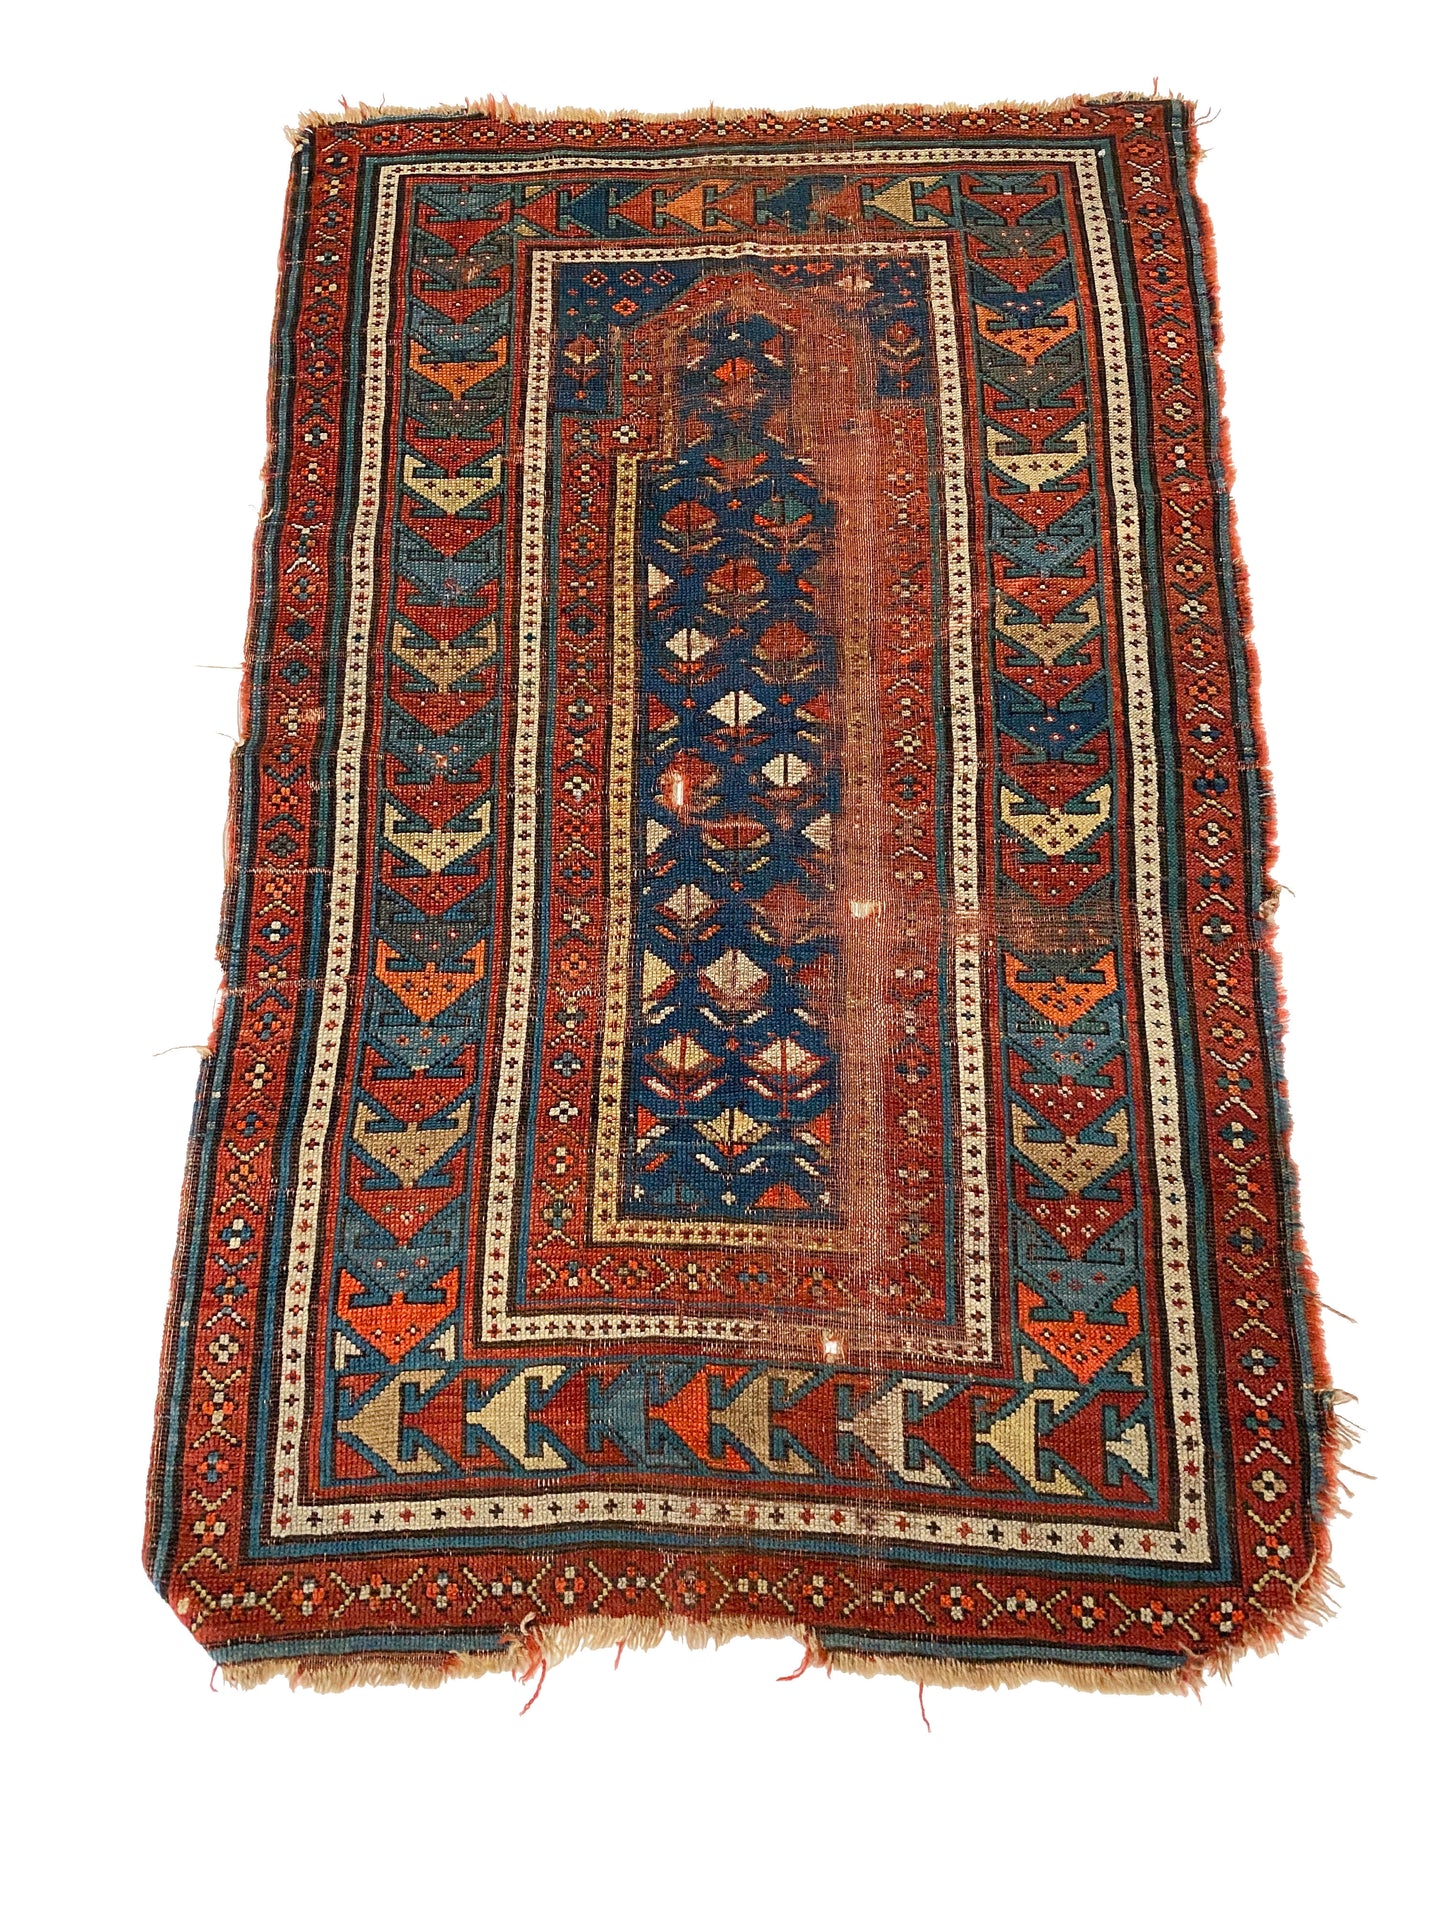 Intricately hand woven Kazak Persian rug with red, blue, orange, tan and white patterns hand woven across - Available from King Kennedy Rugs Los Angeles